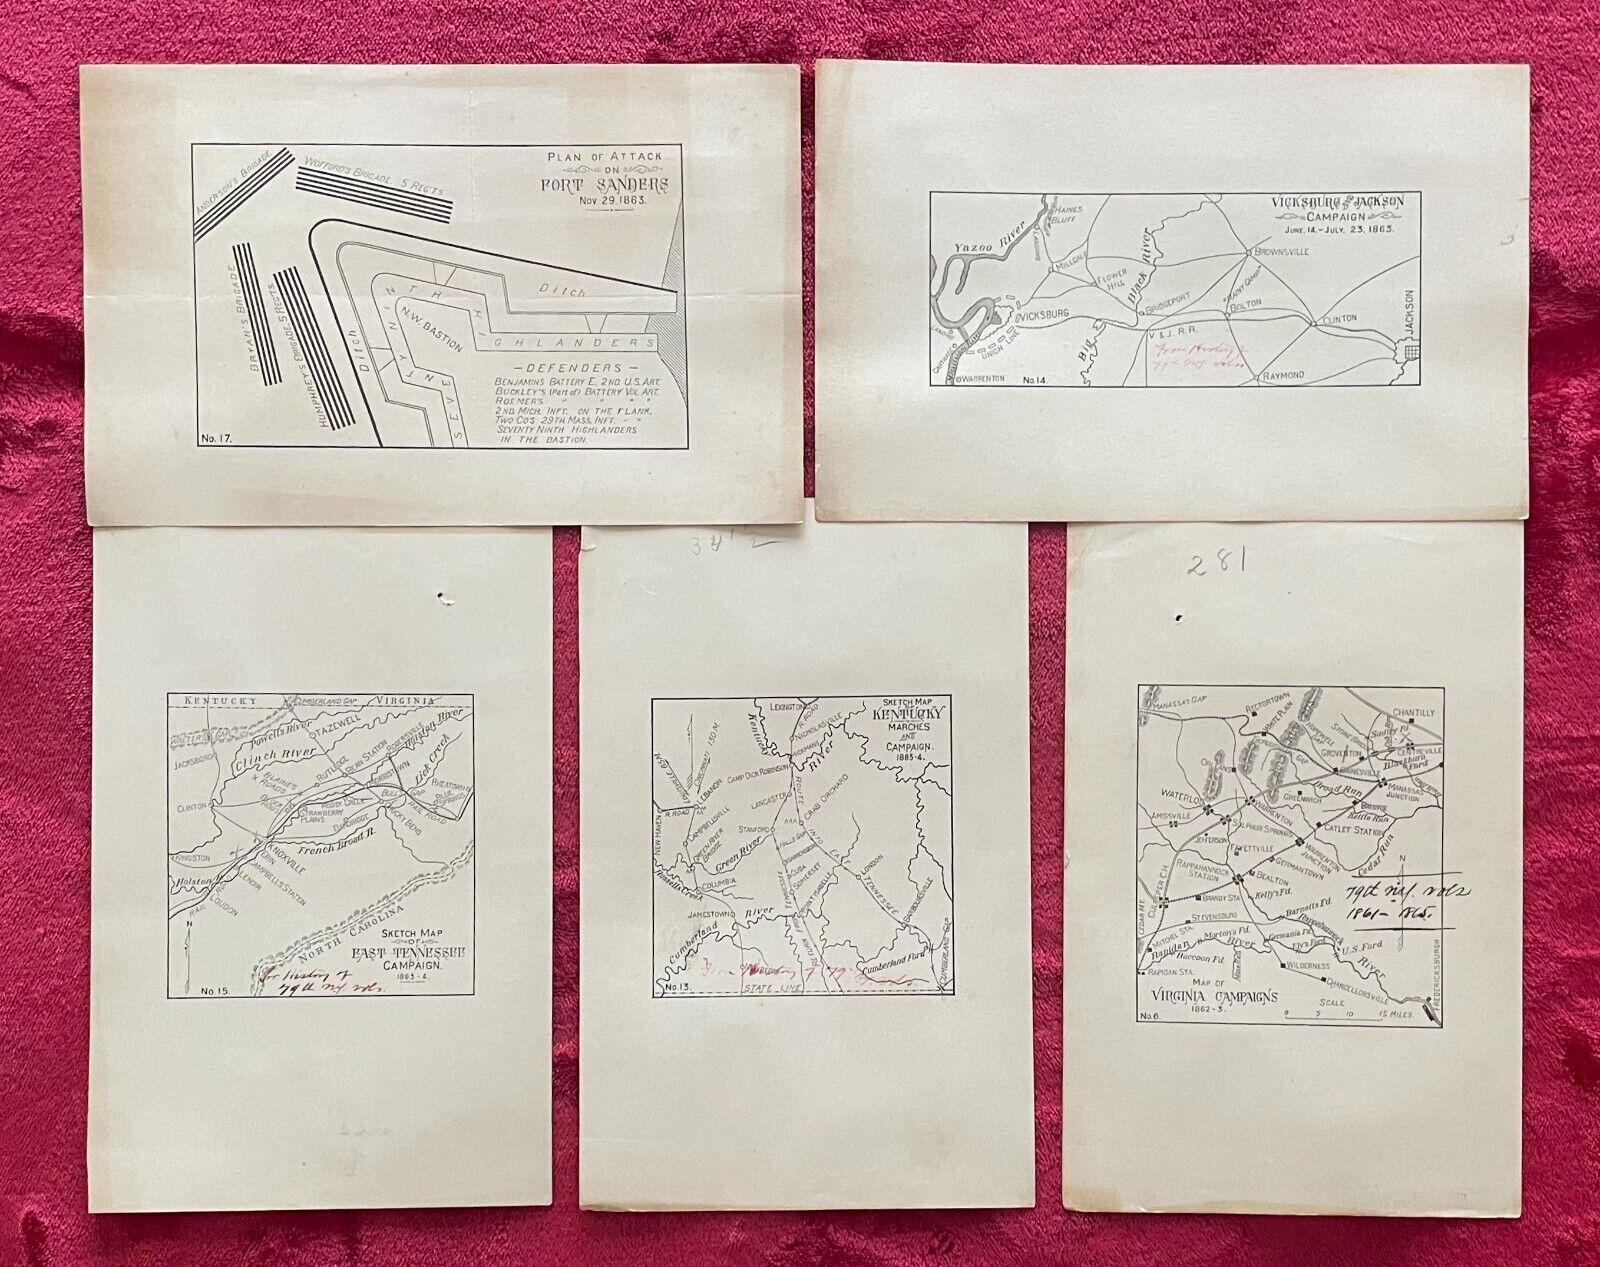 79TH NY VOLUNTEERS CIVIL WAR CAMPAIGN MAPS - PLAN OF ATTACK FT. SANDERS & OTHERS